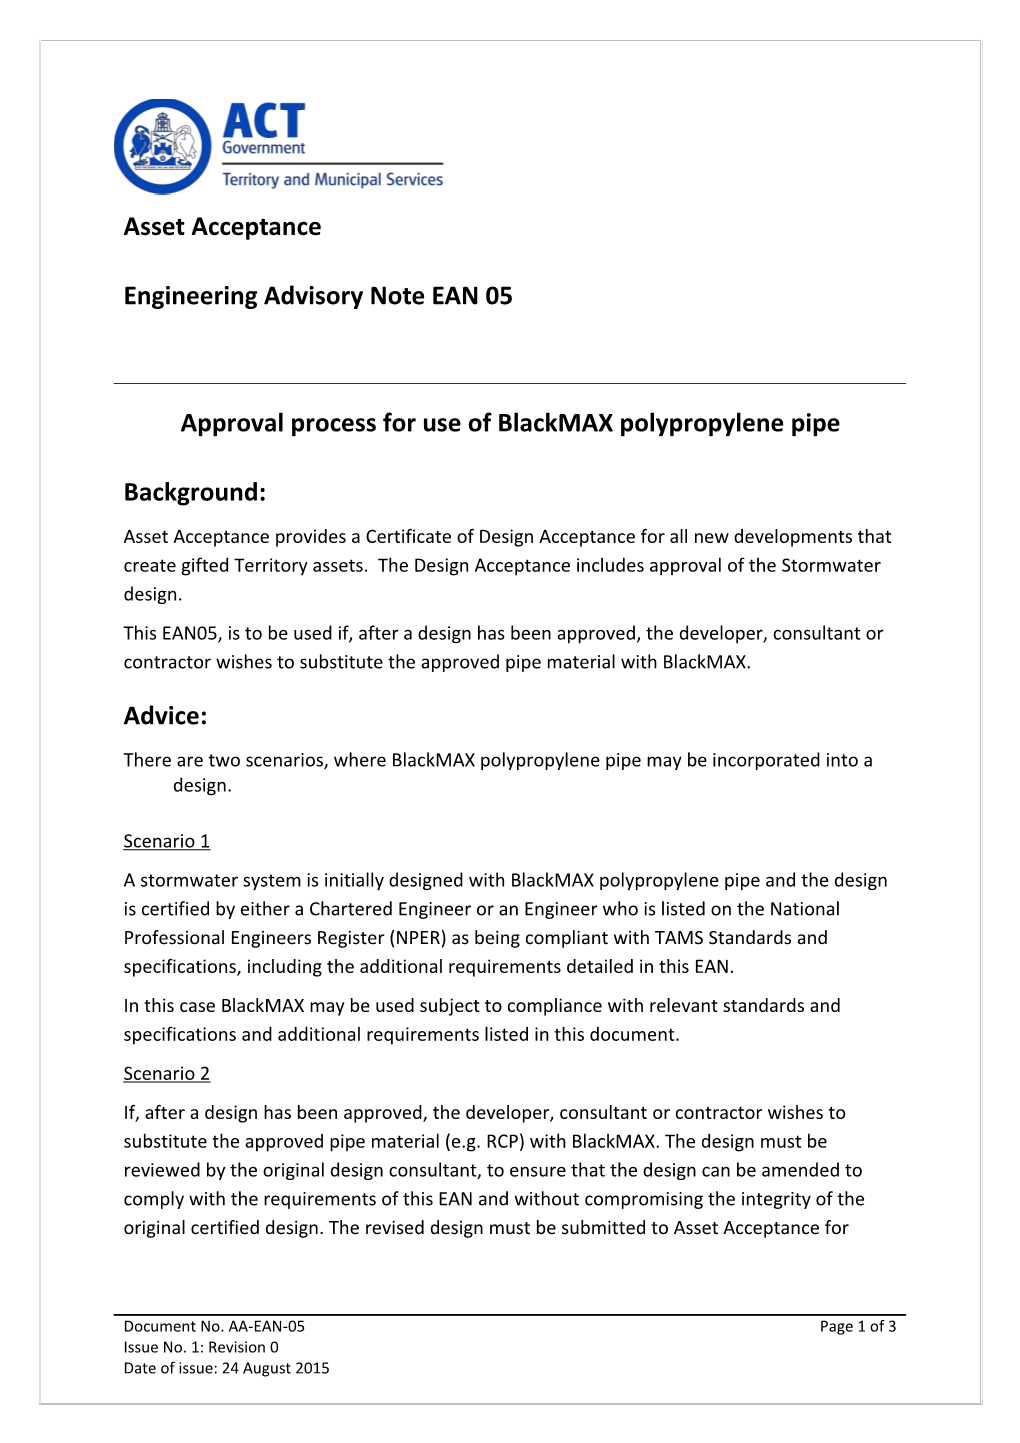 Approval Process for Use of Blackmax Polypropylene Pipe